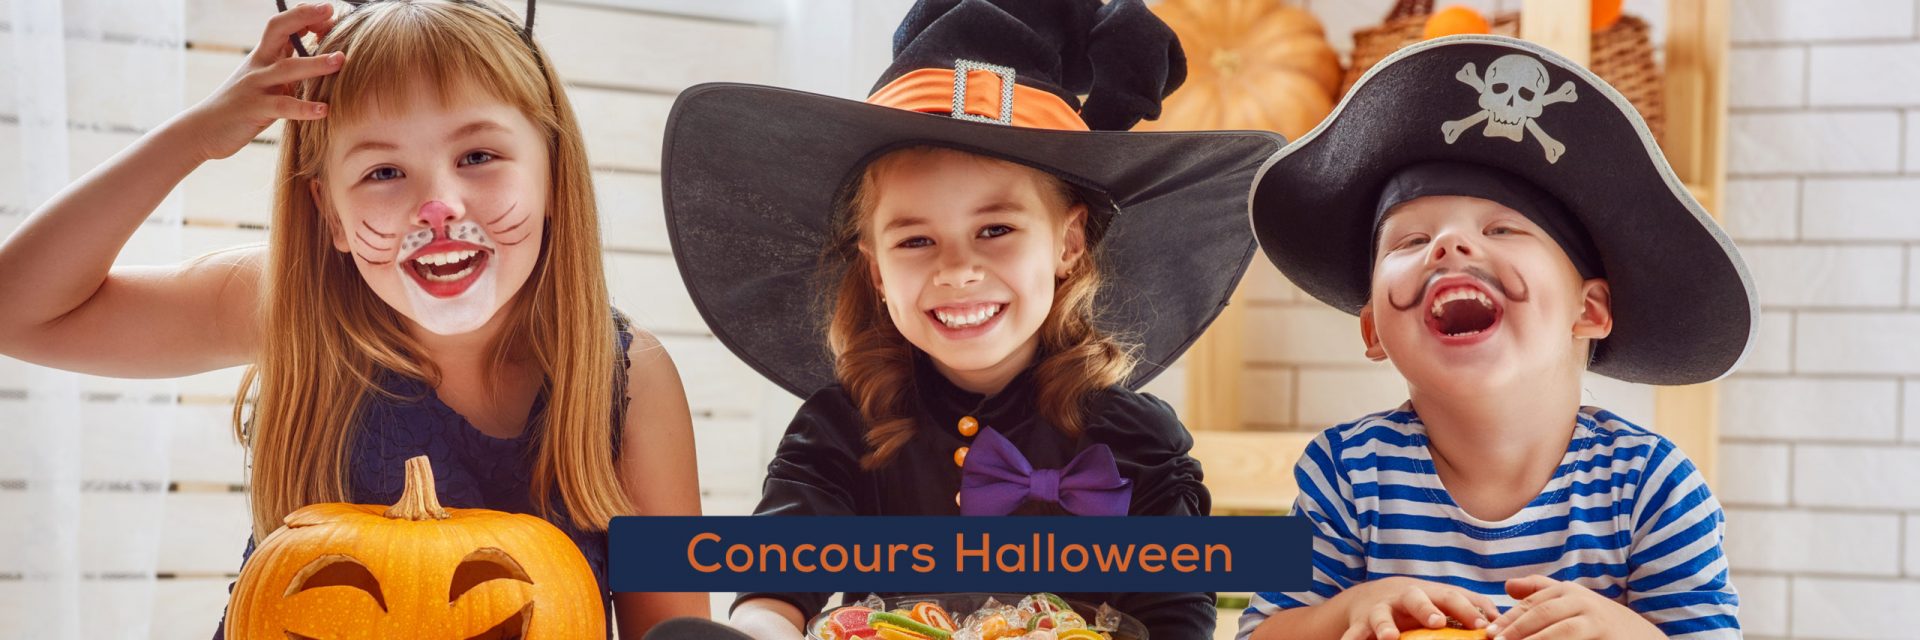 unireso-RS-Halloween_concours-cover